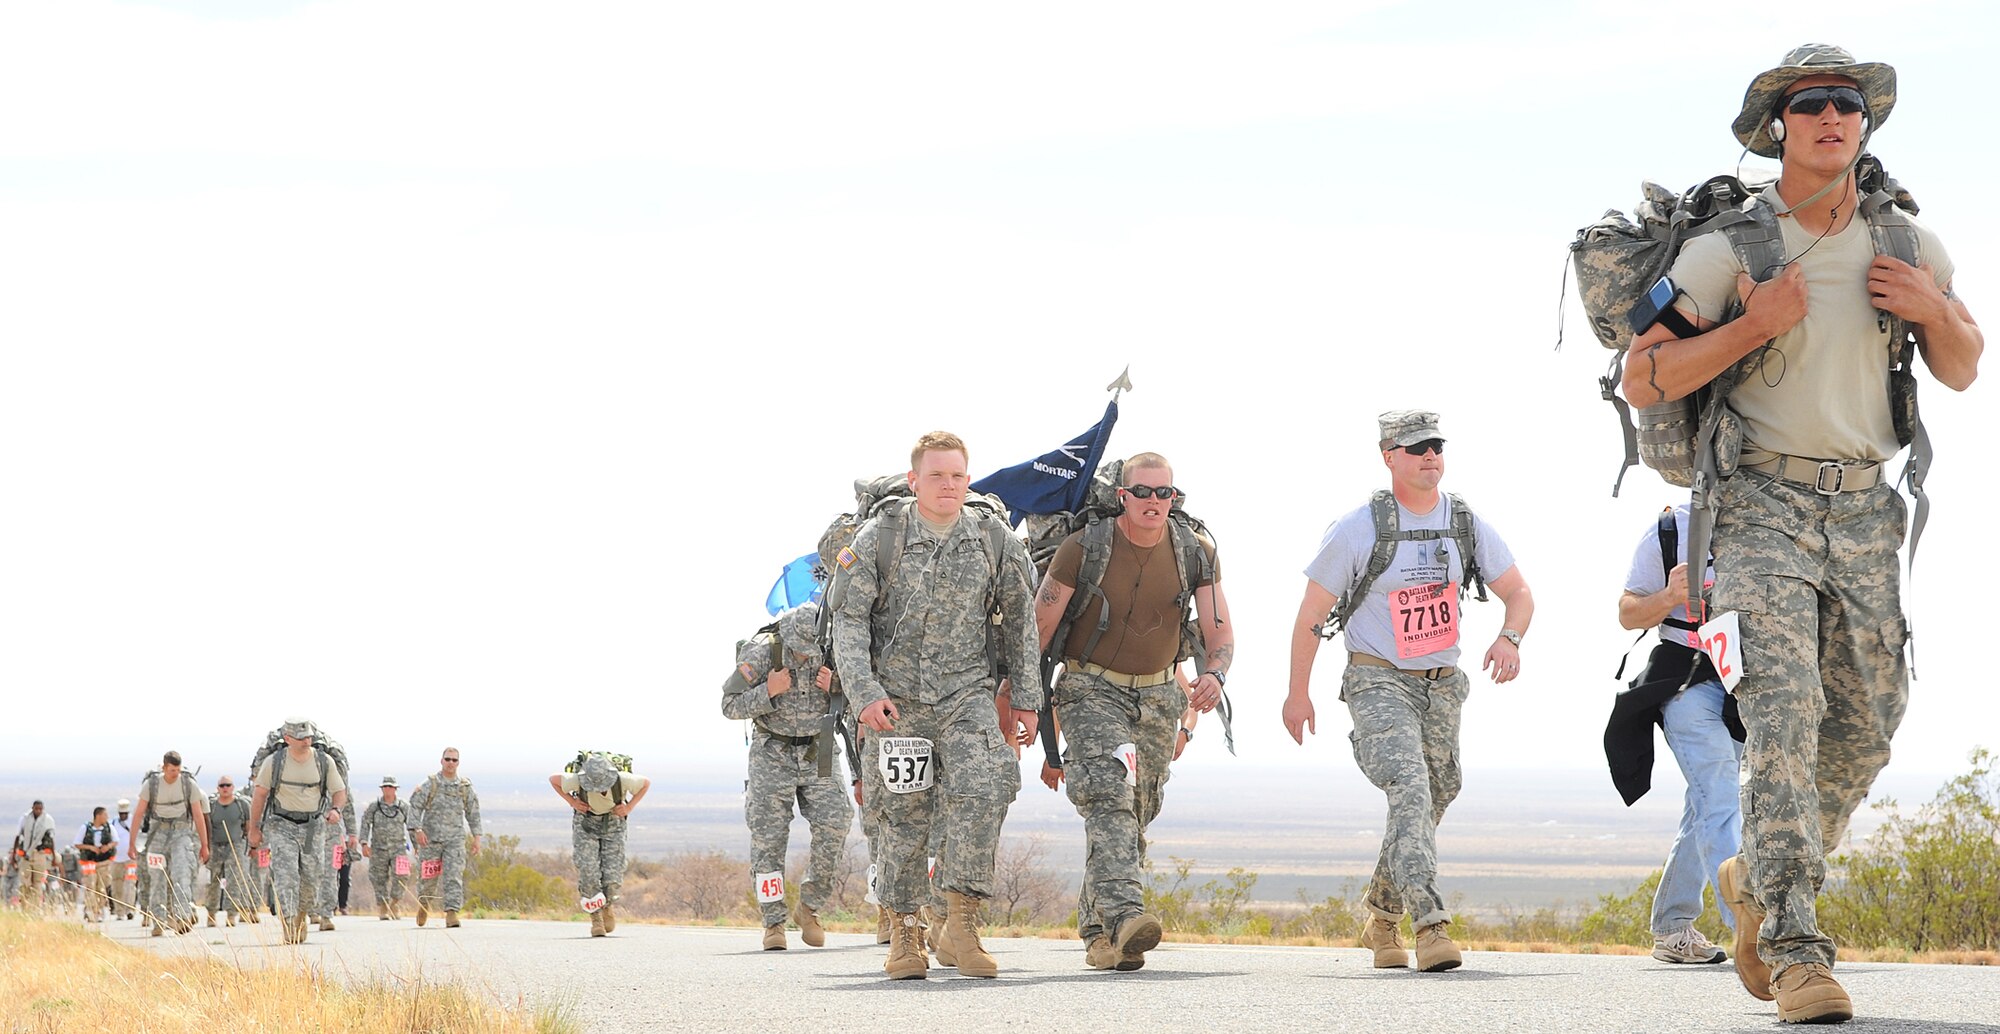 Participants from all over the world tread the rigourous 26-mile course at White Sands Missile Range, N.M., March 29, as part of the Bataan Death March. The  March honors a special group of World War II heroes who were responsible for the defense of the islands of Luzon, Corregidor and the harbor defense forts of the Philippines. (U.S. Air Photo/ Airman 1st Class DeAndre Curtiss)